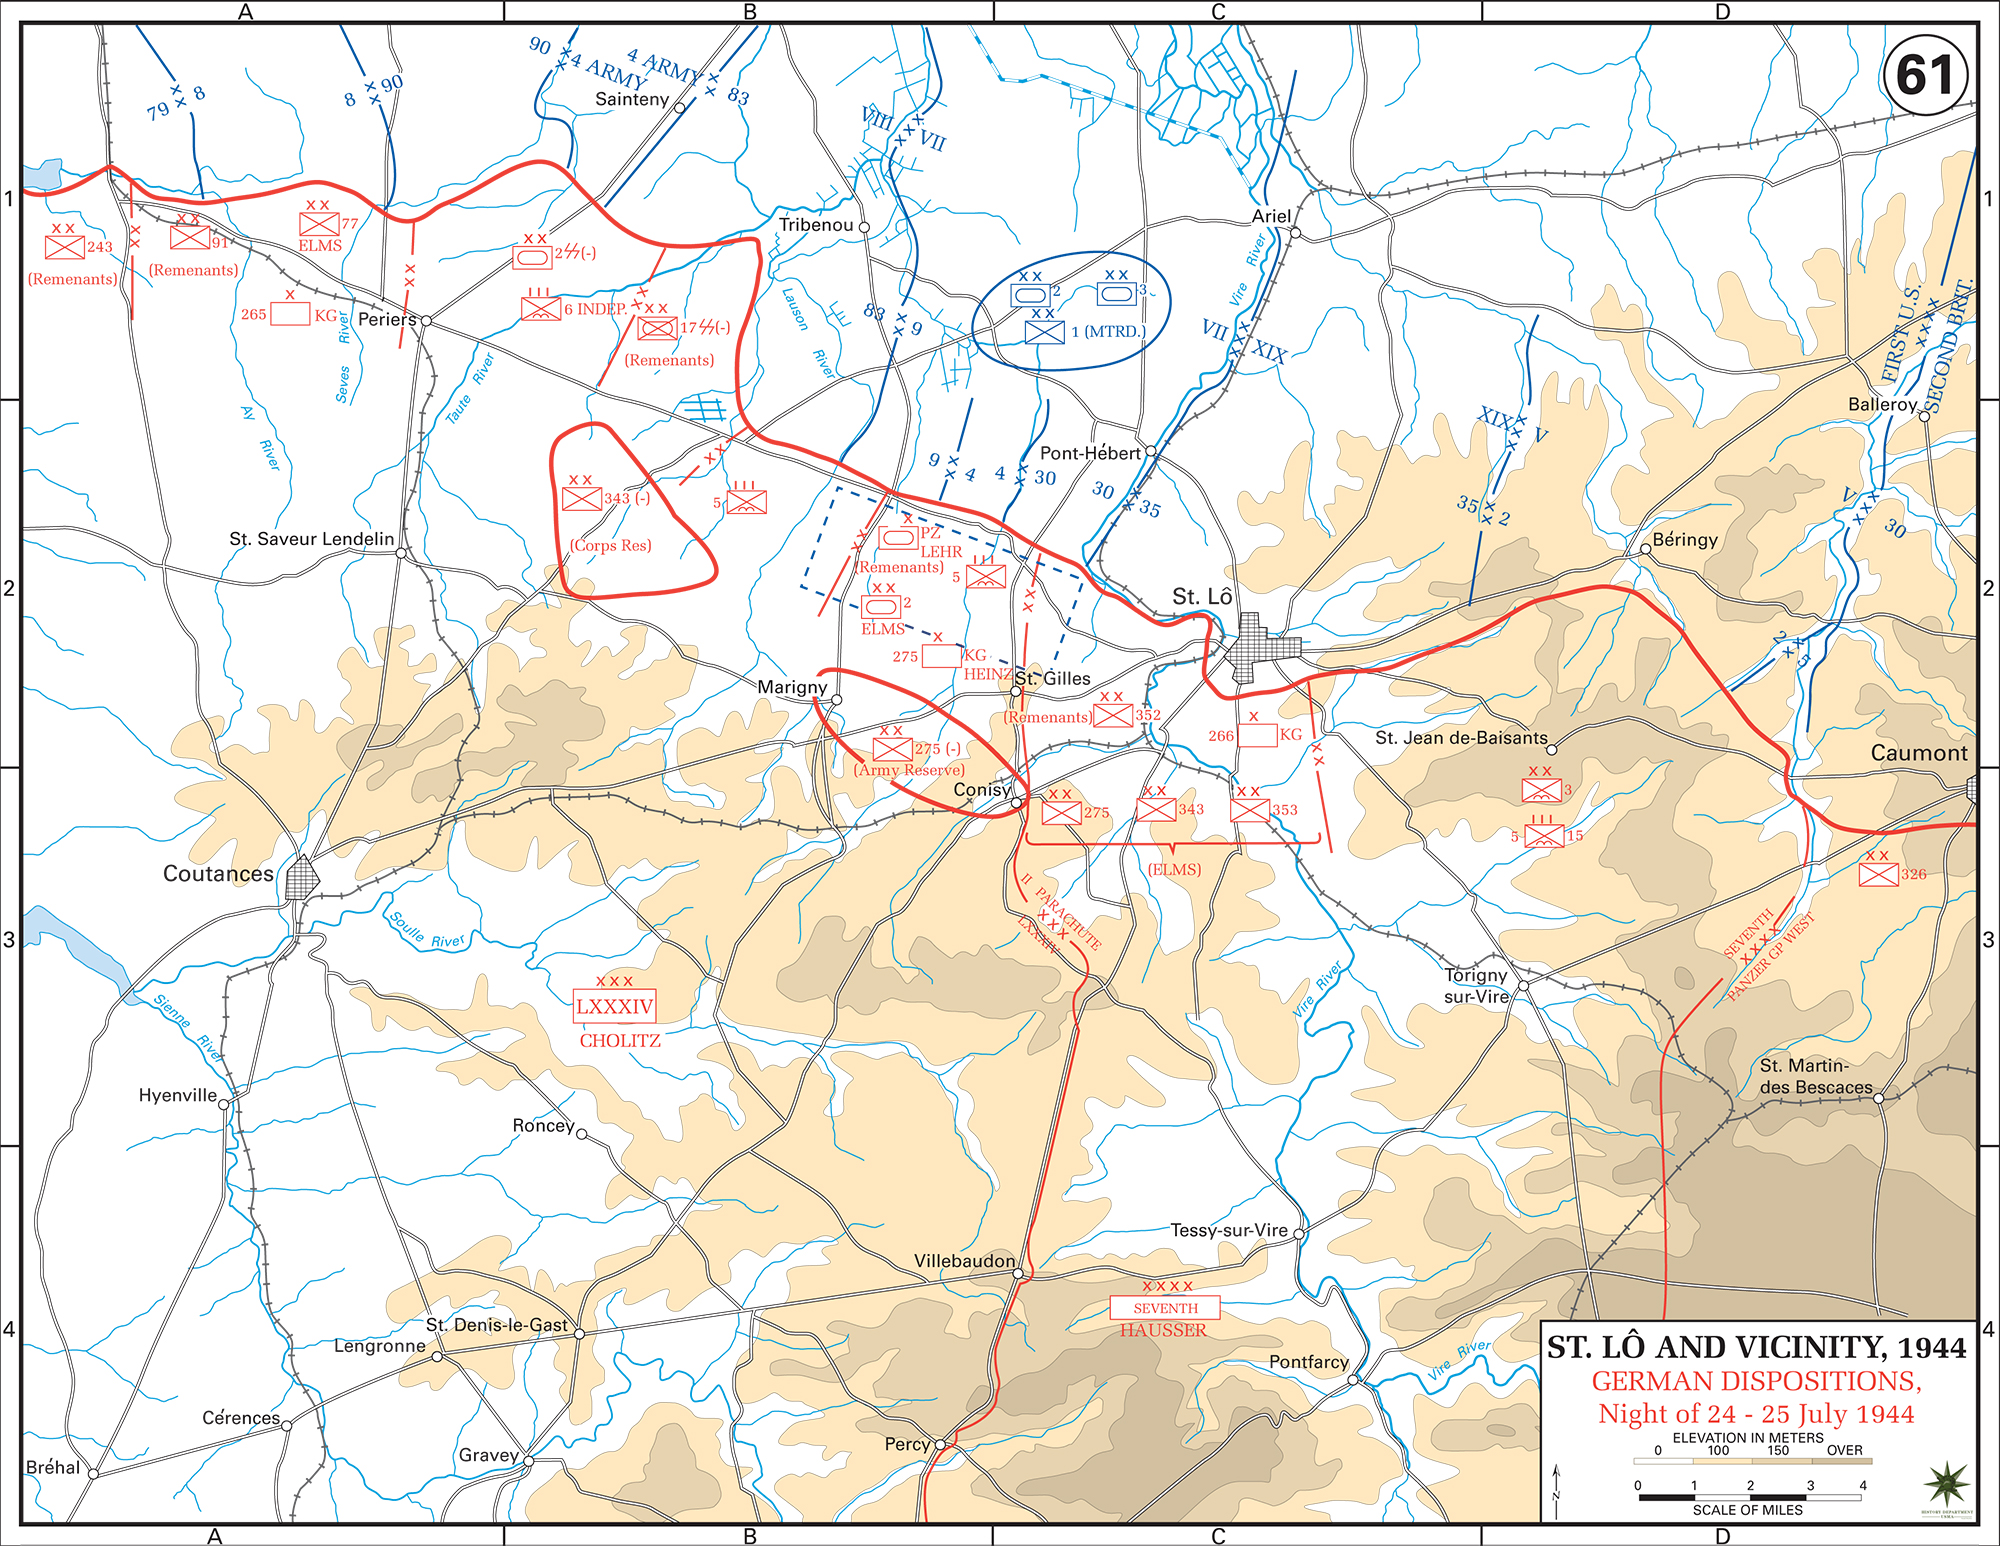 Map of WWII: Normandy Invasion. Saint-L (St. Lo) and Vicinity. German Dispositions at the Night of 24/25 July 1944.